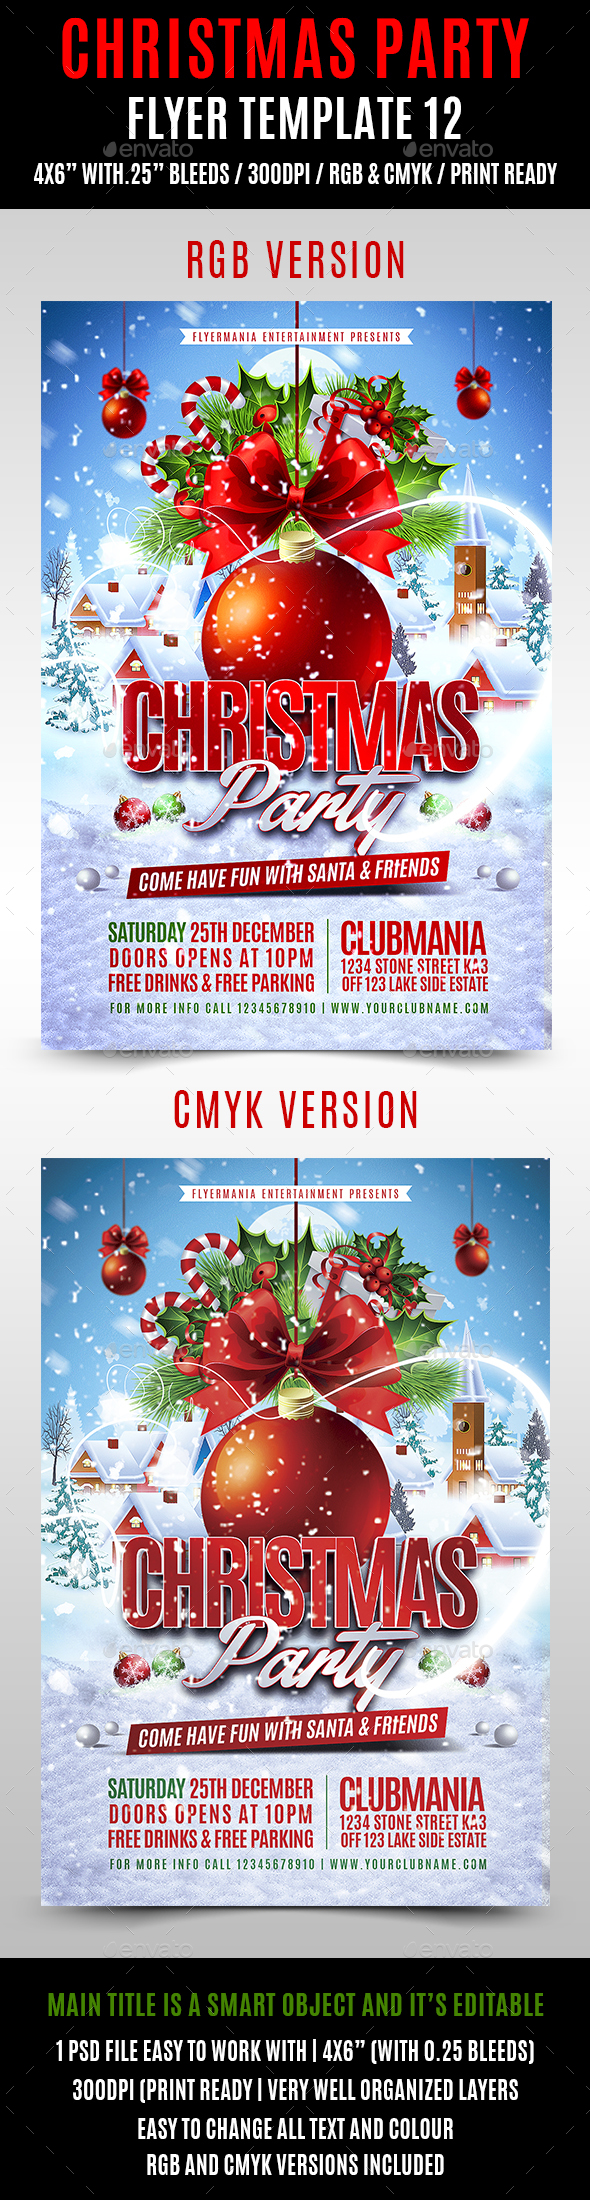 Christmas Party Flyer Template 12 - Flyers Print Templates